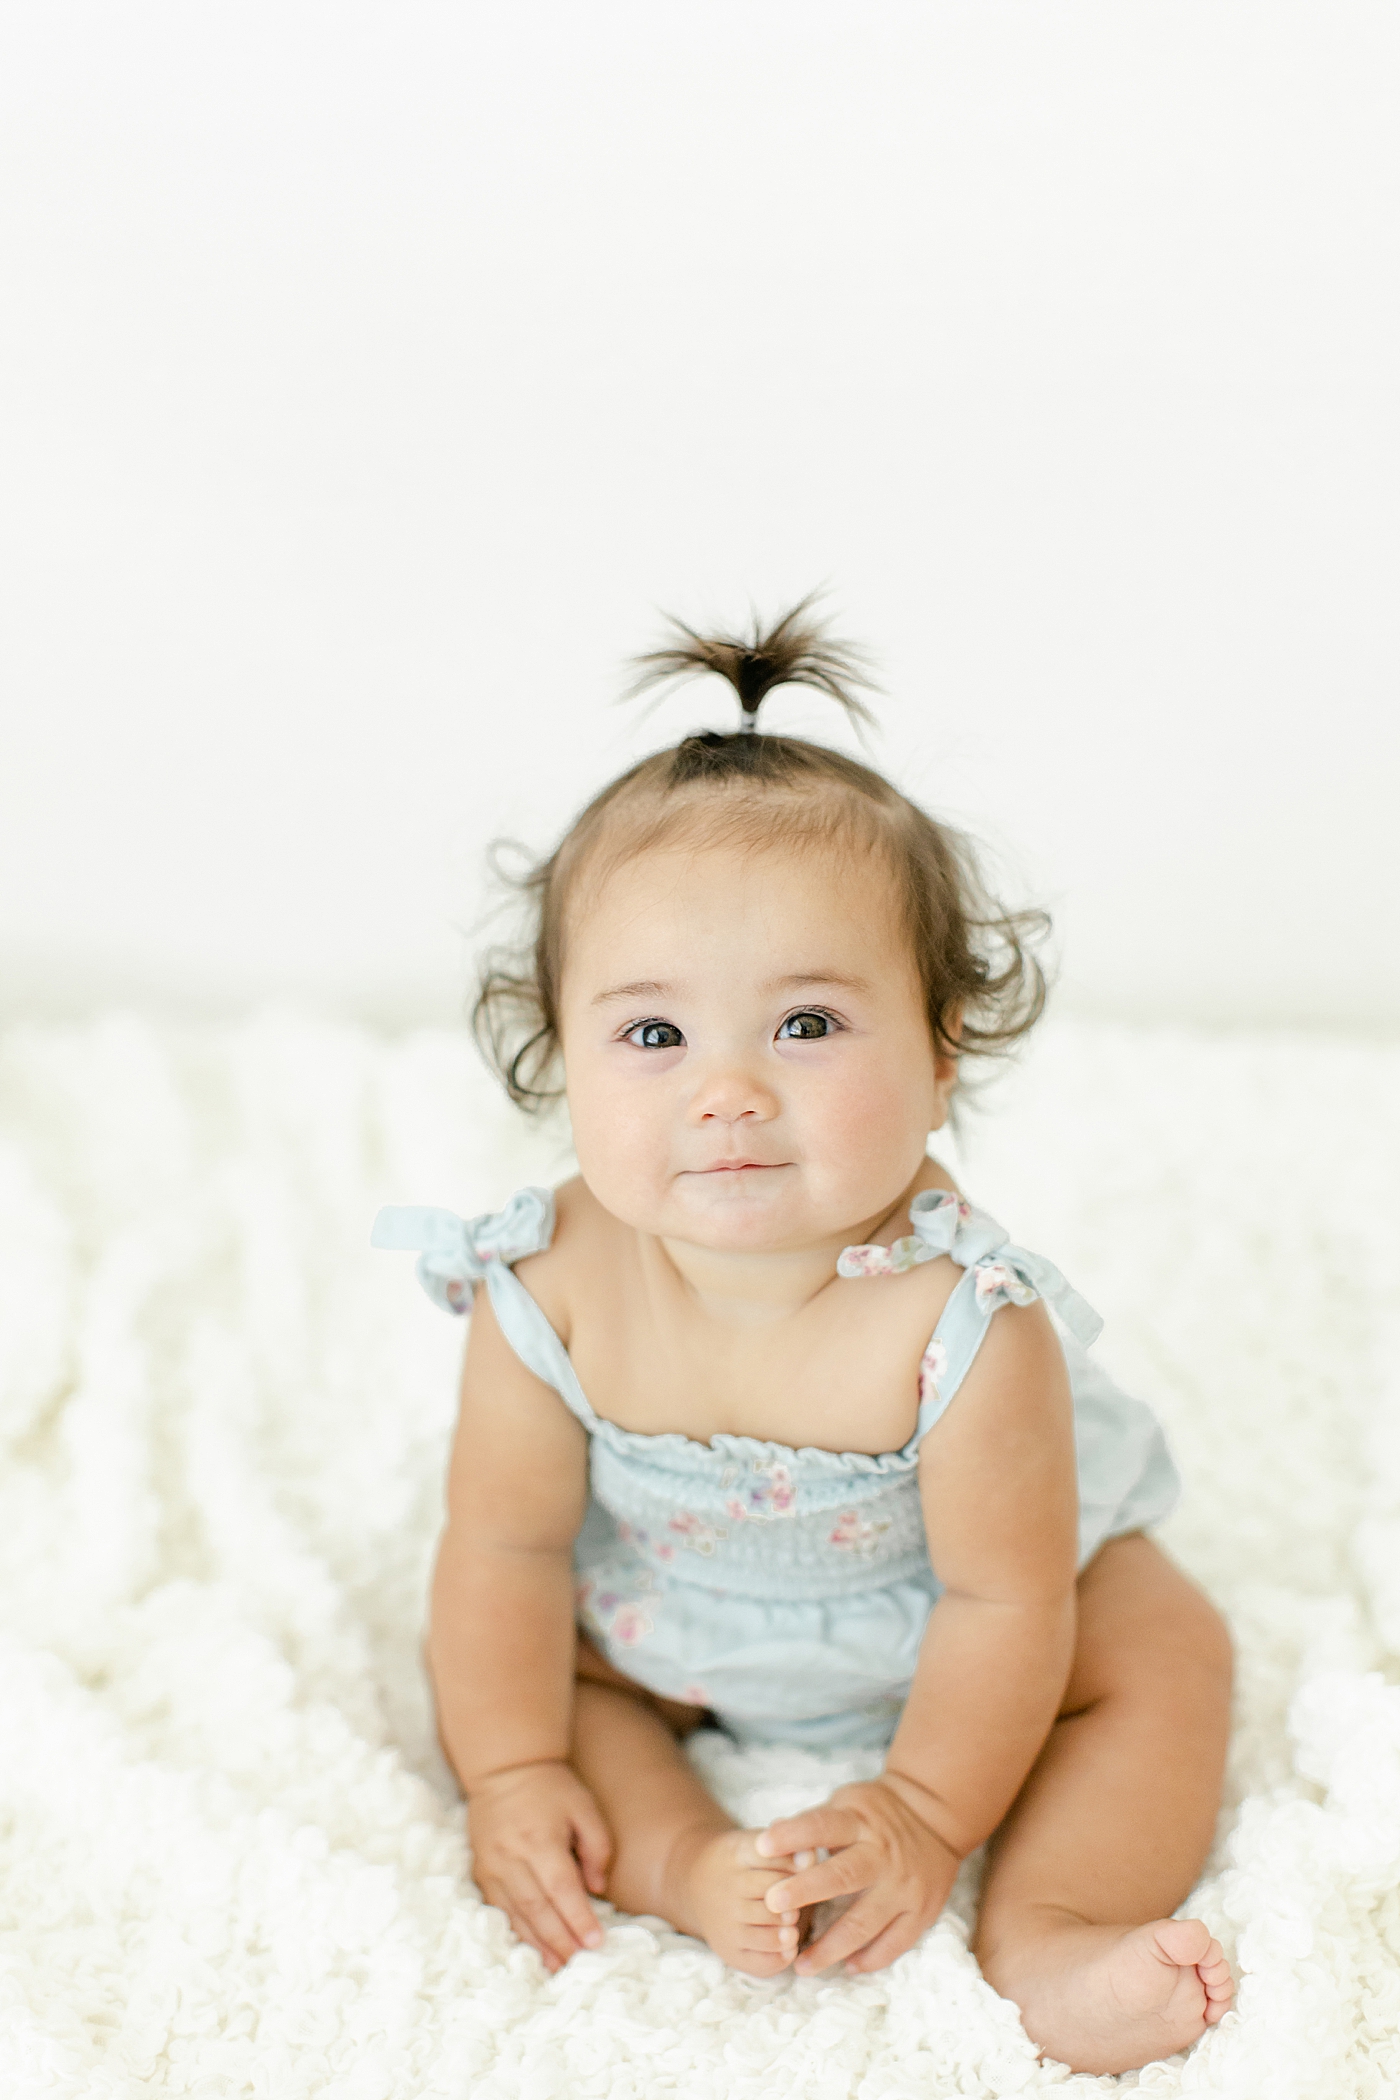 during her Six Month Studio Session | Image by Chrissy Winchester Photography